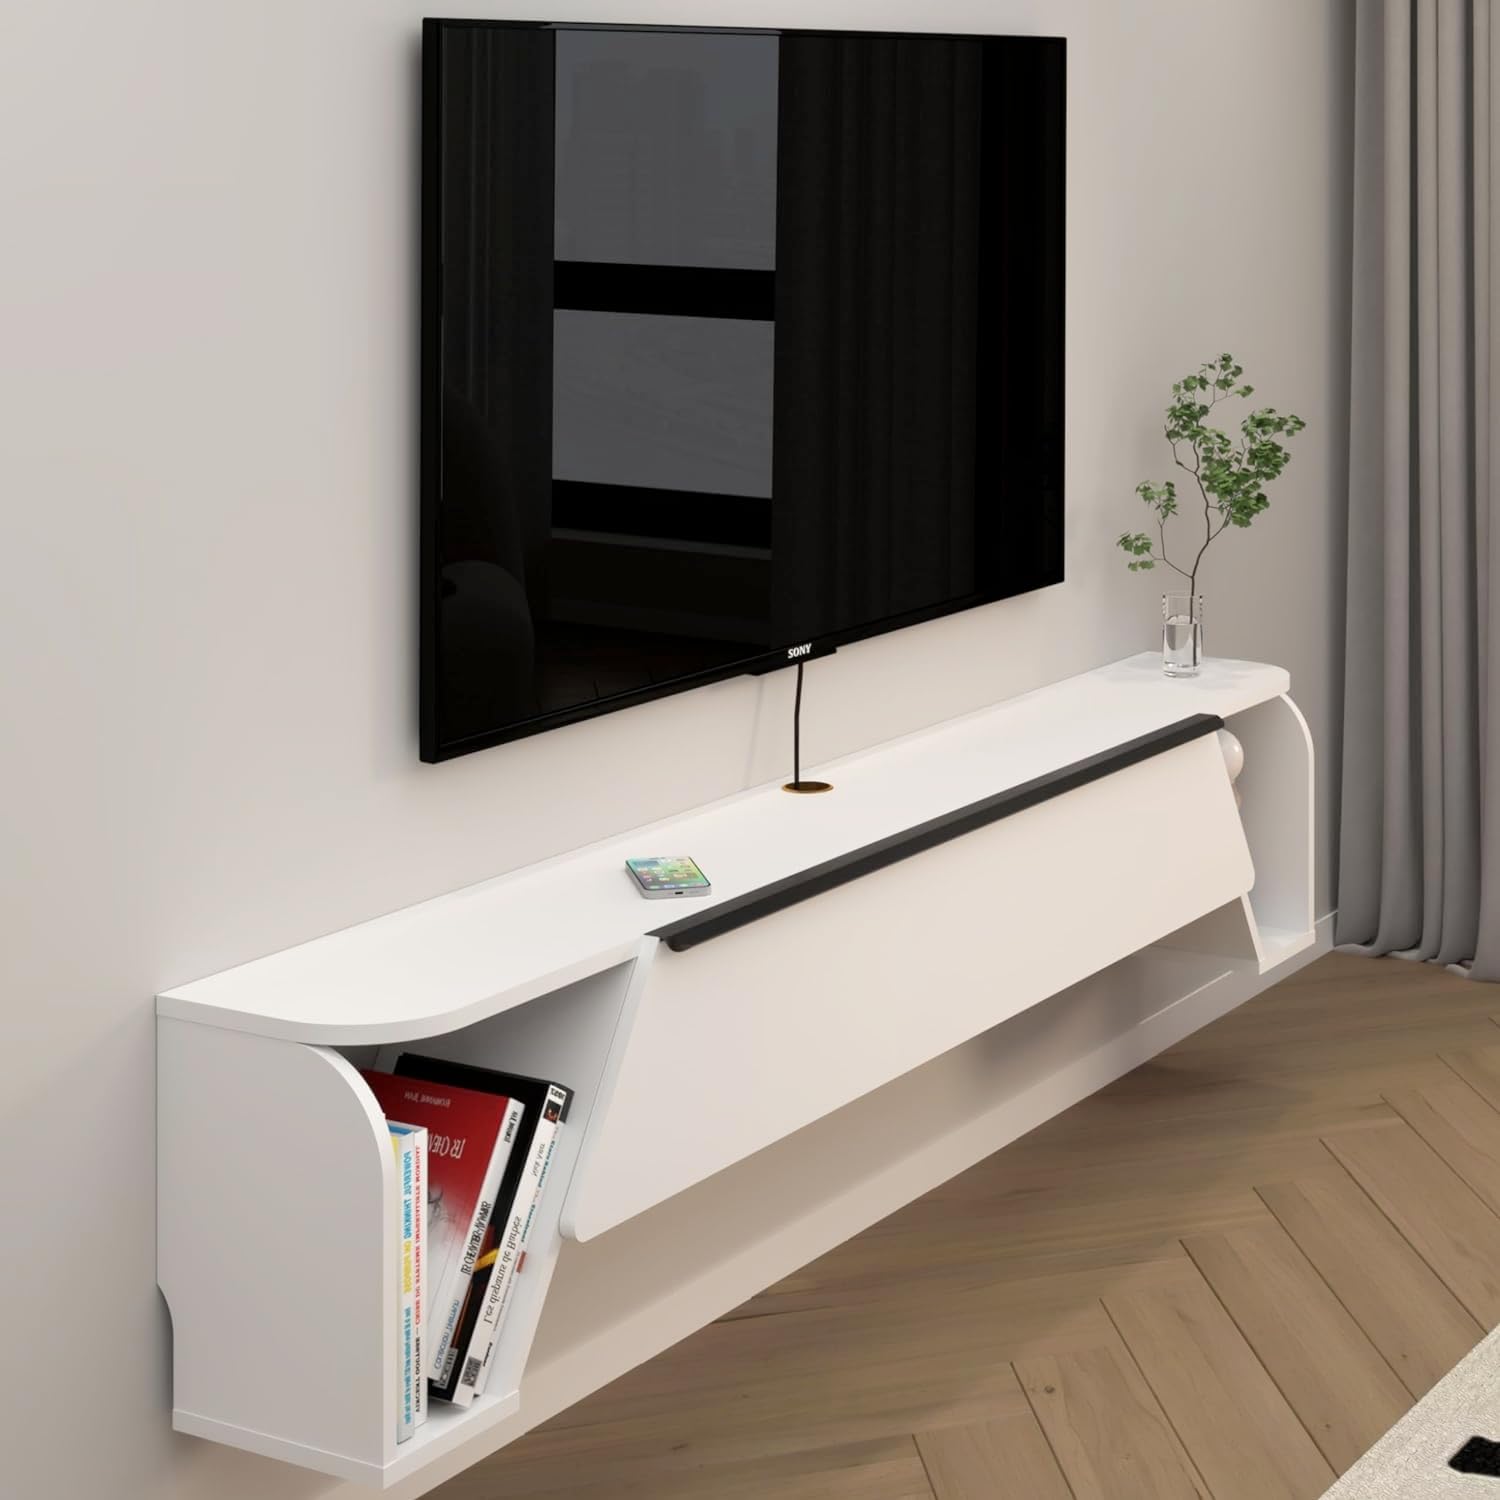 70.86" White Floating Media Console, Free Standing TV Stand With Golden Accent